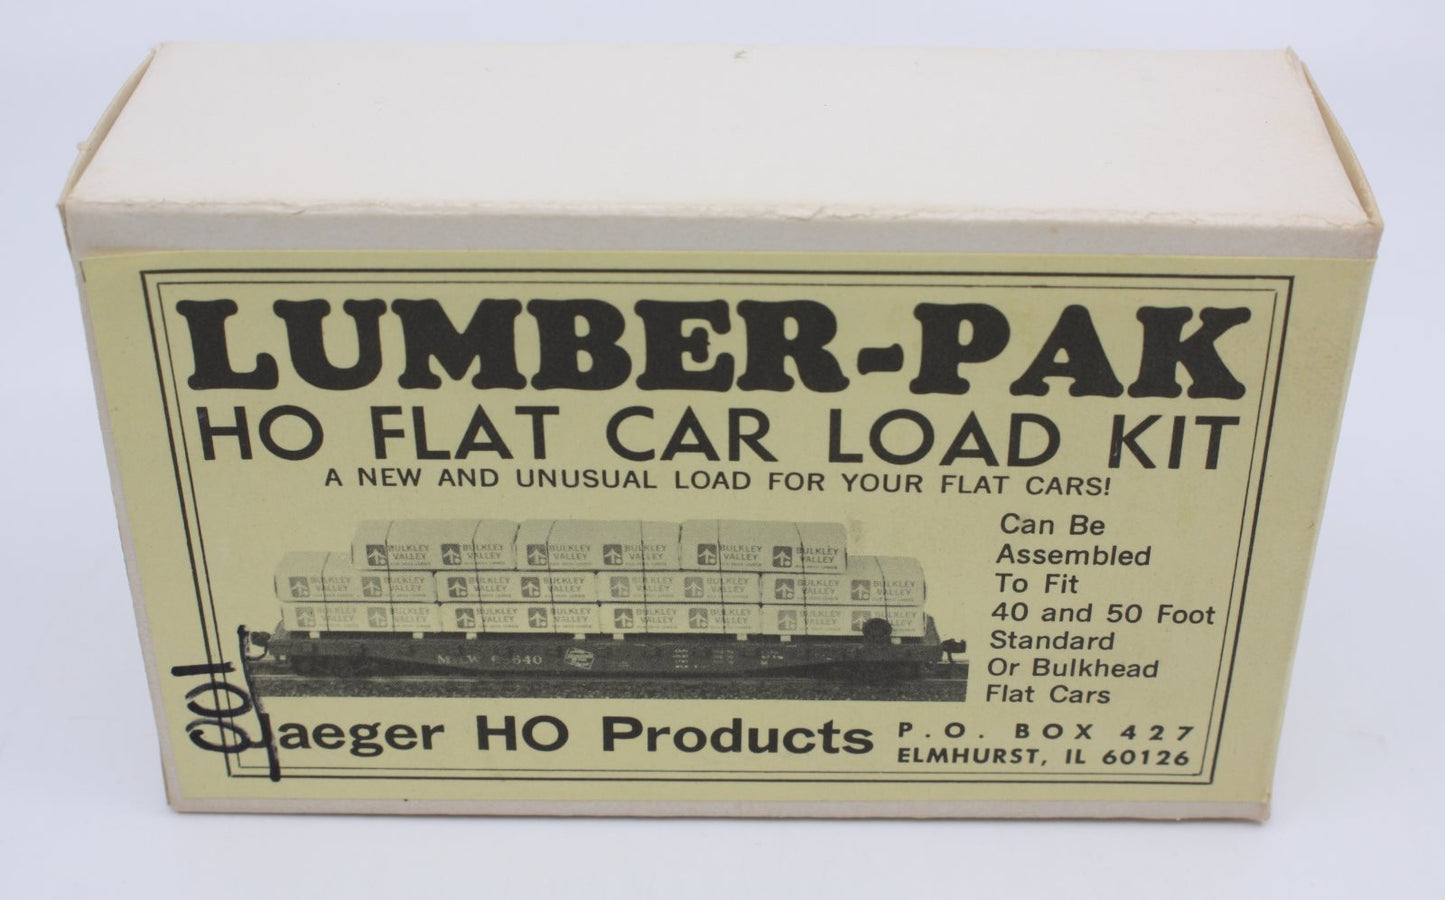 Jaeger Products 001 HO Lumber Pack Flat Car Load Kit.